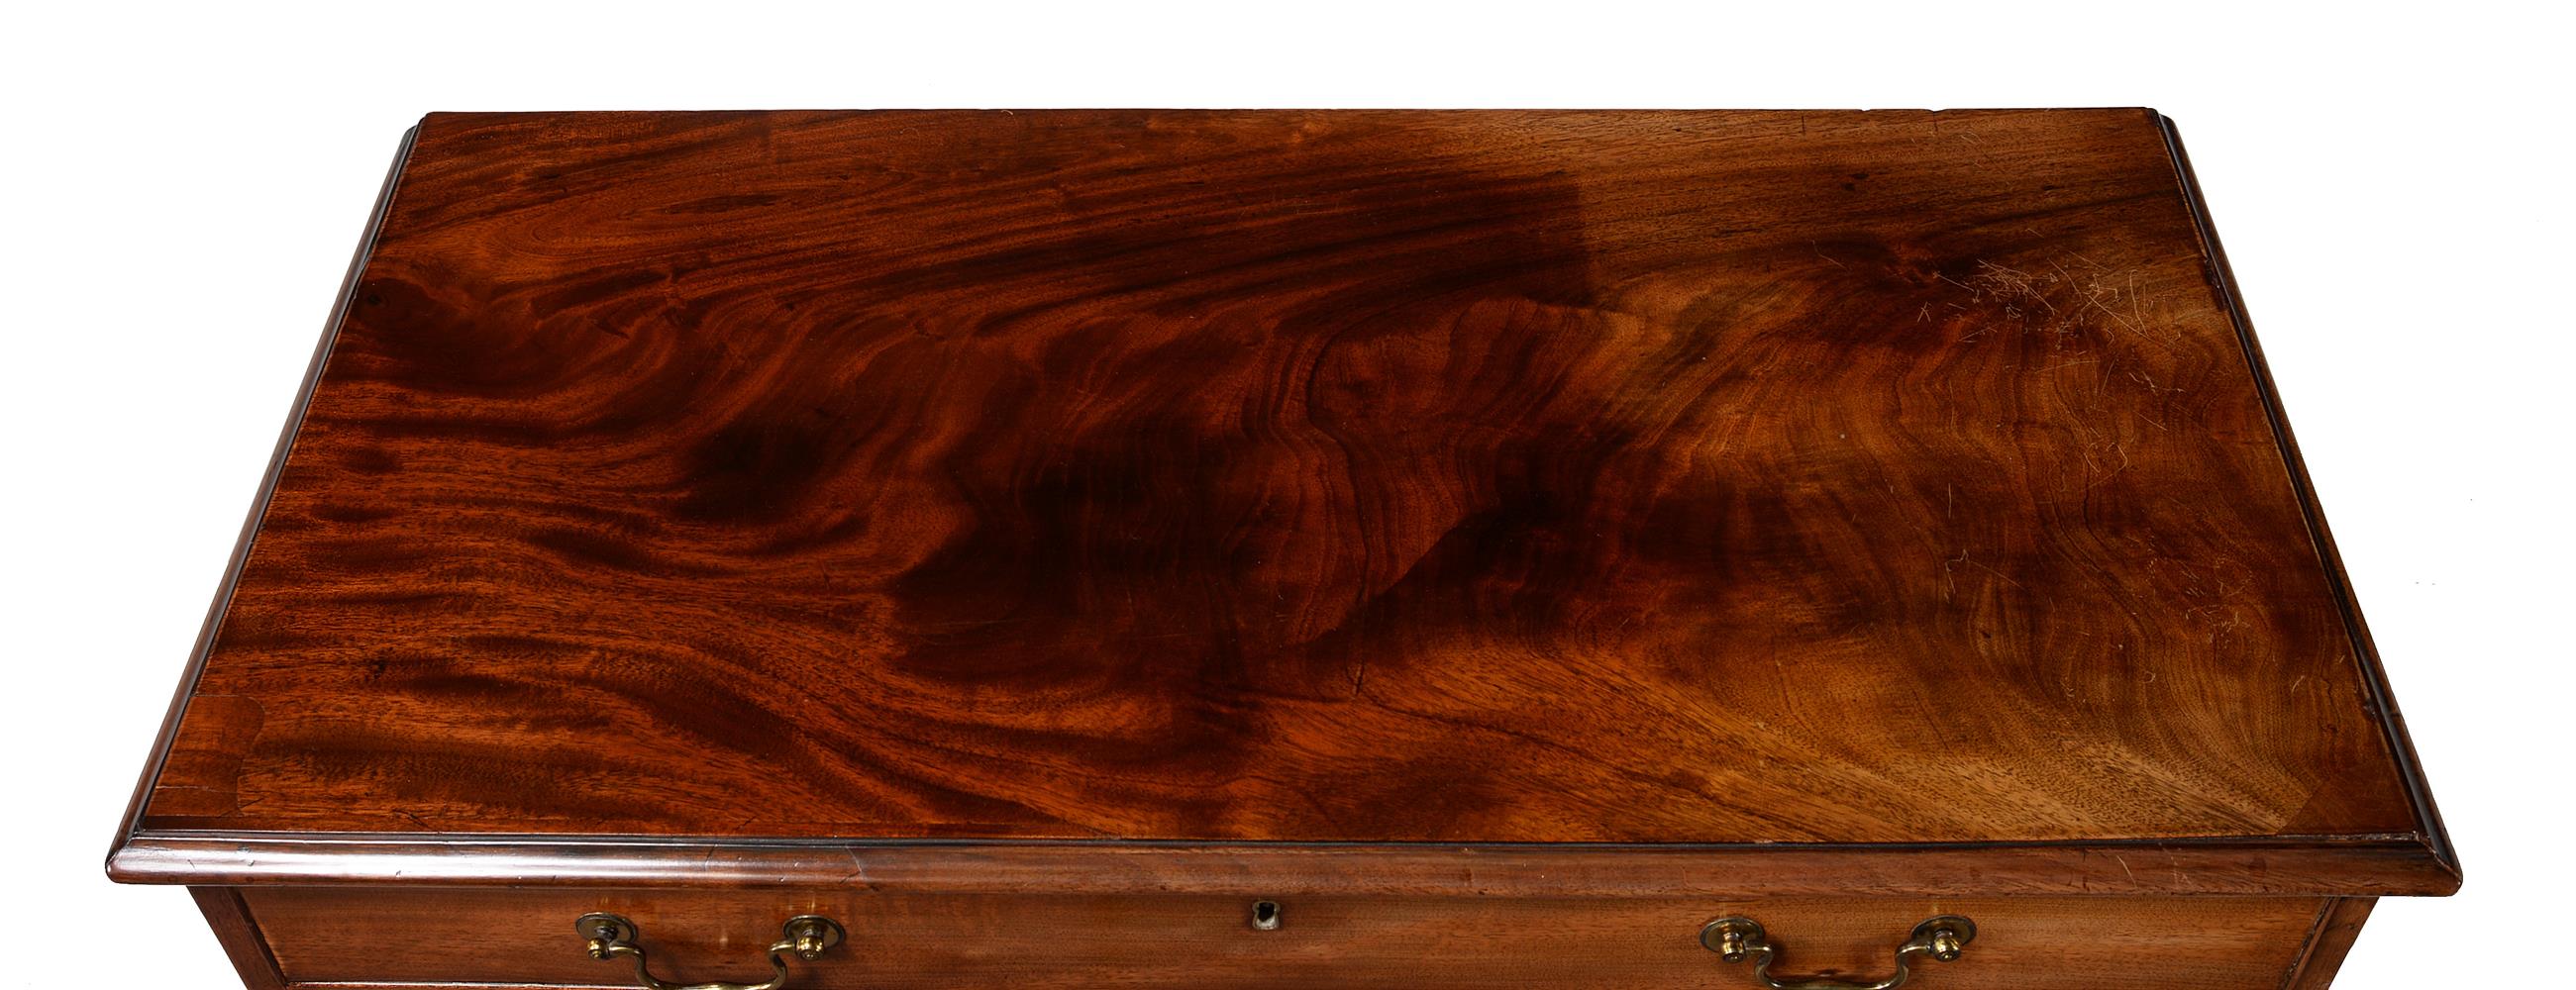 A George III mahogany chest of drawers - Image 2 of 3